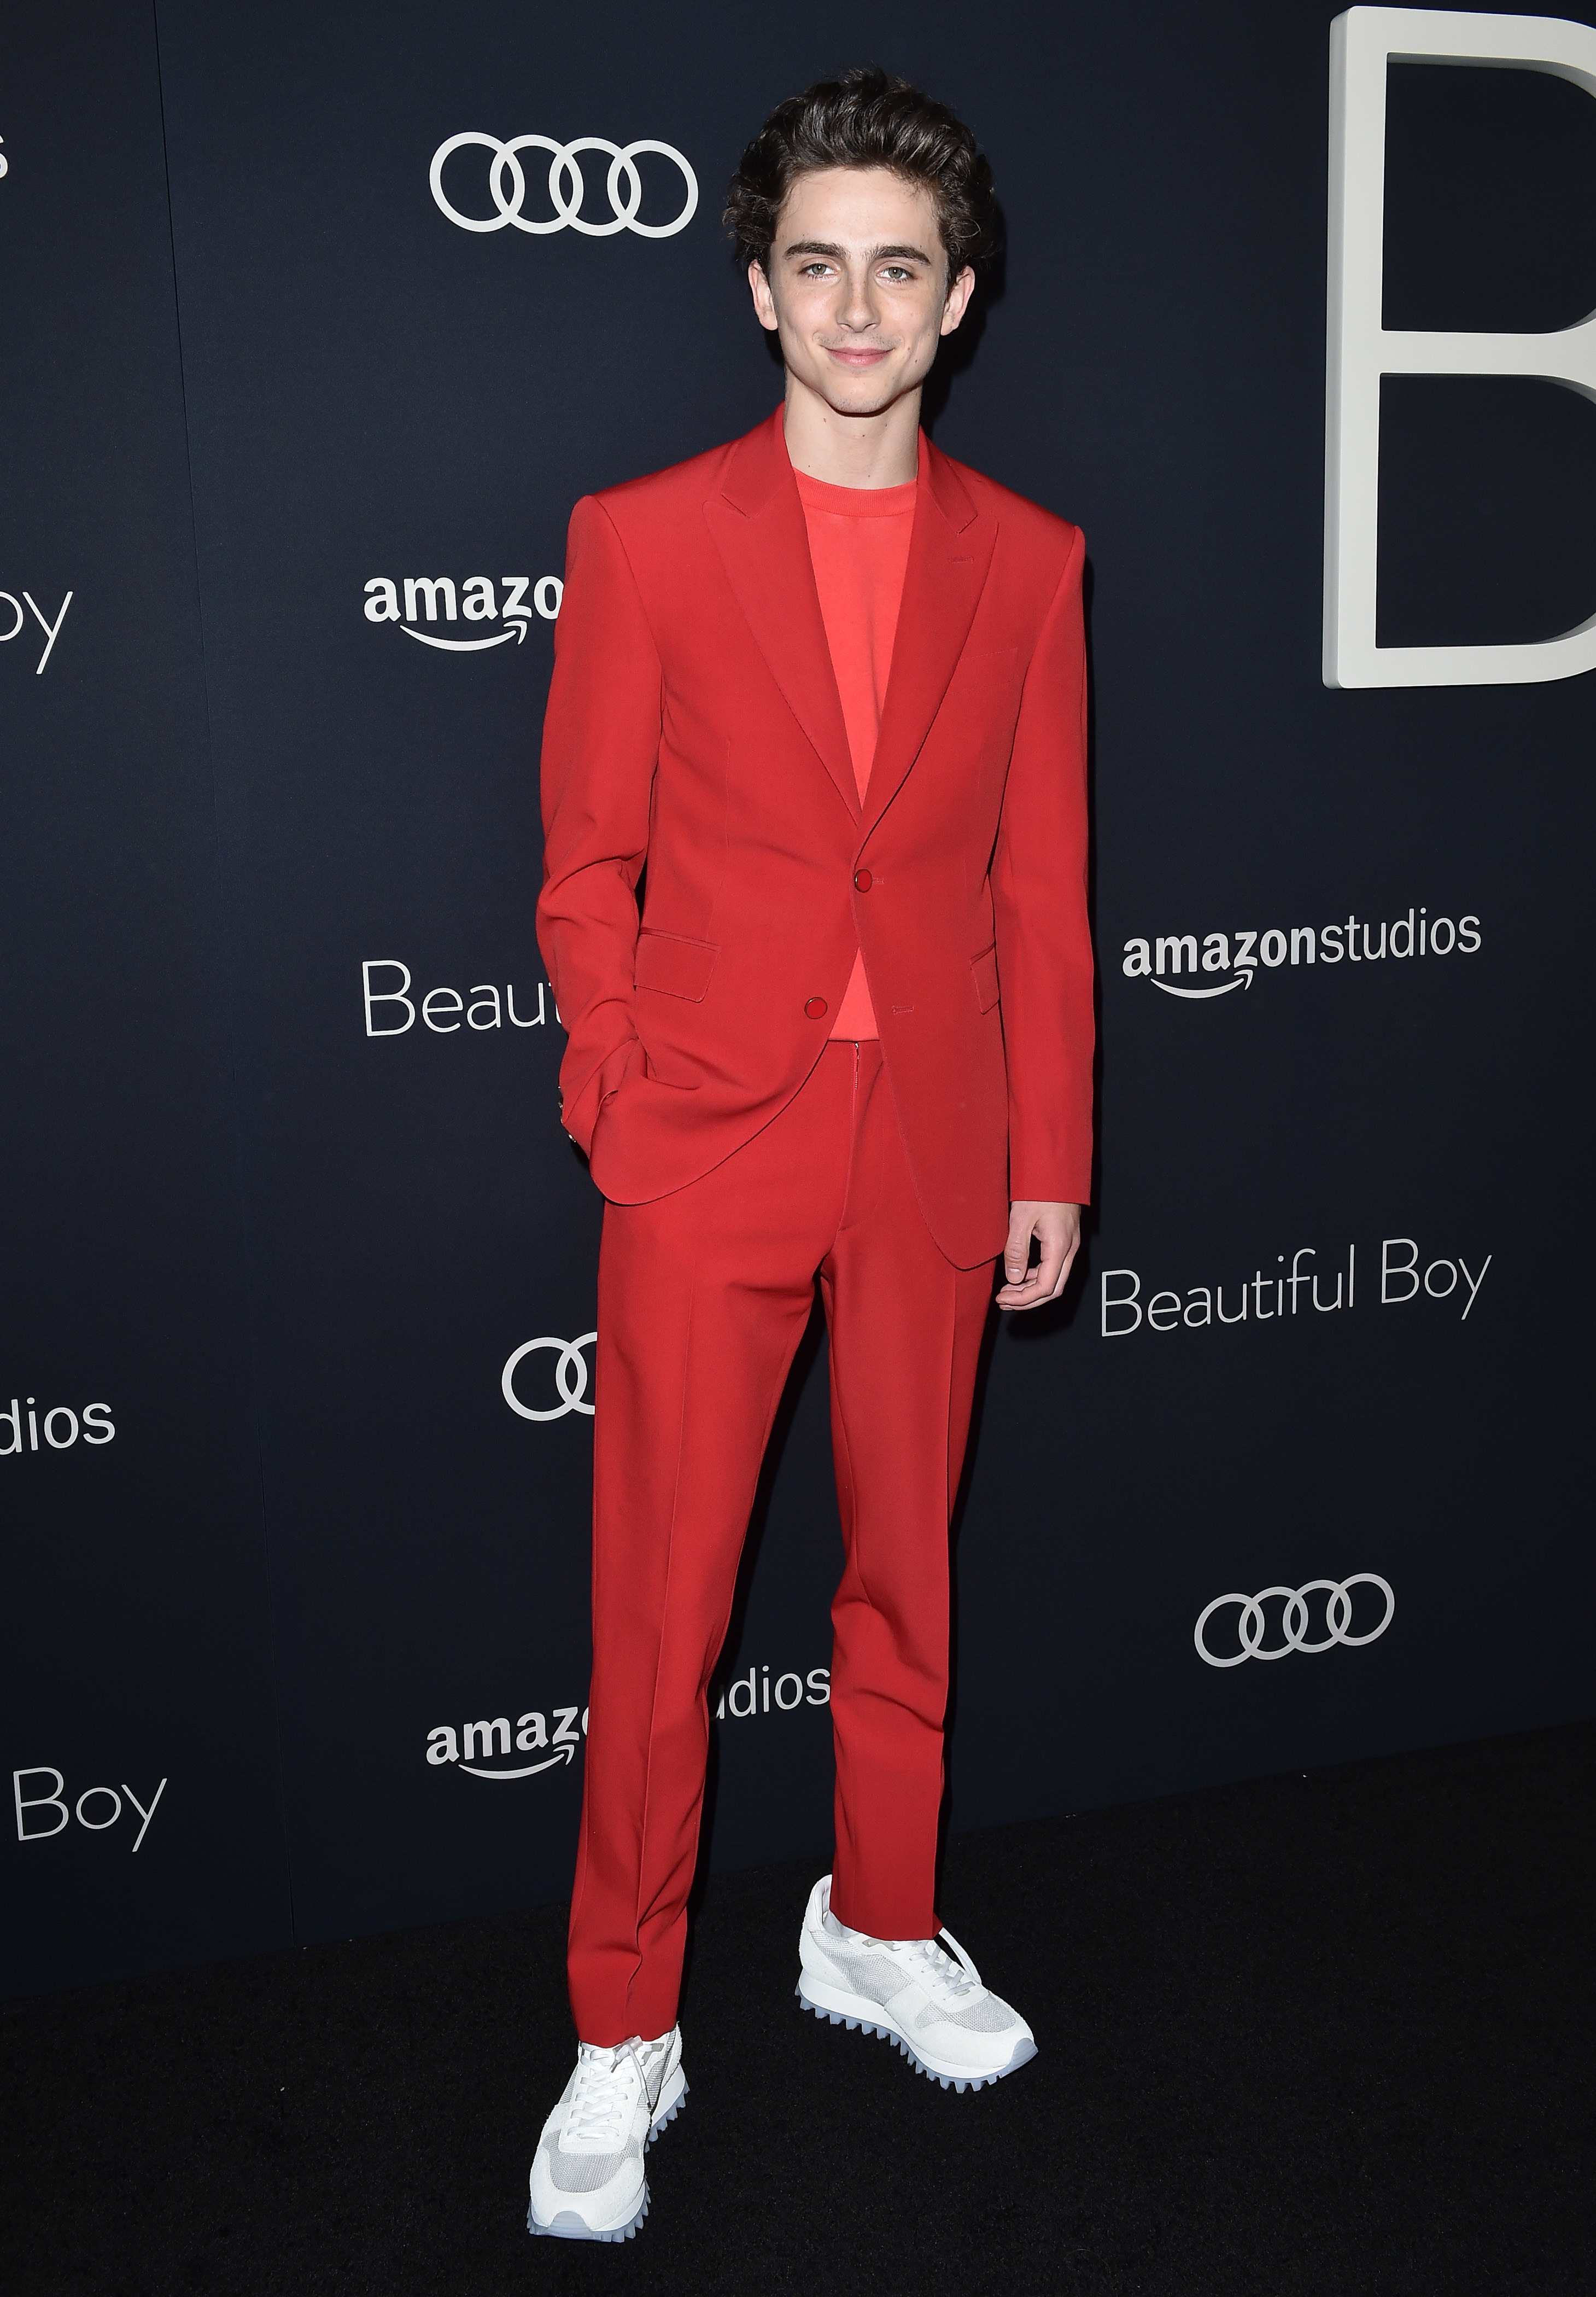 Timothée wears a red suit with a red T-shirt